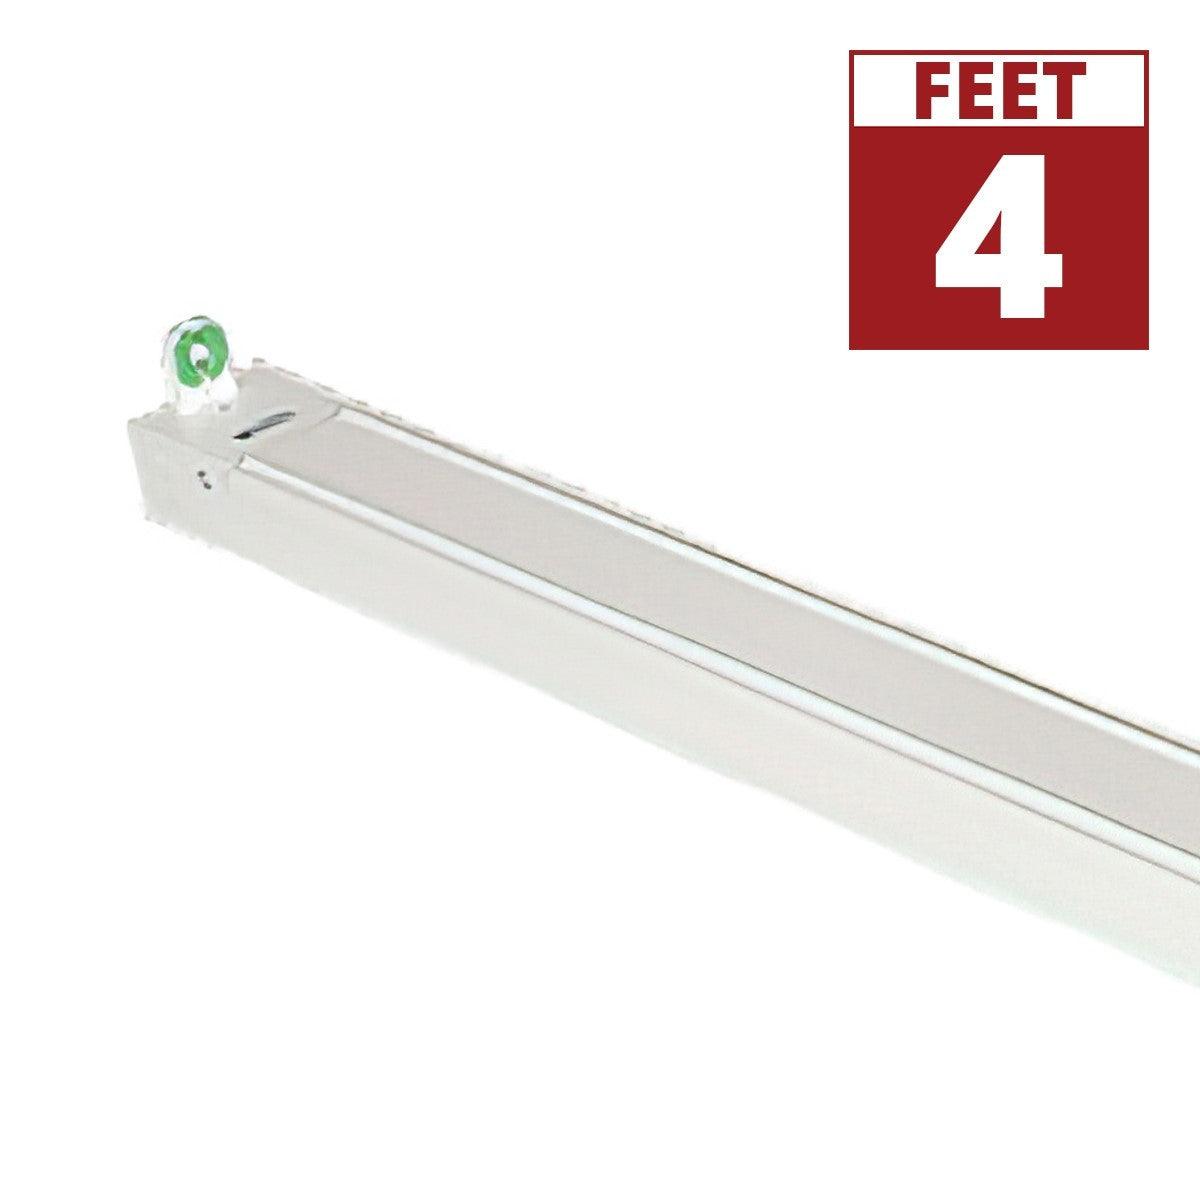 120V LED Light Strips: Long run strips for indoors and out